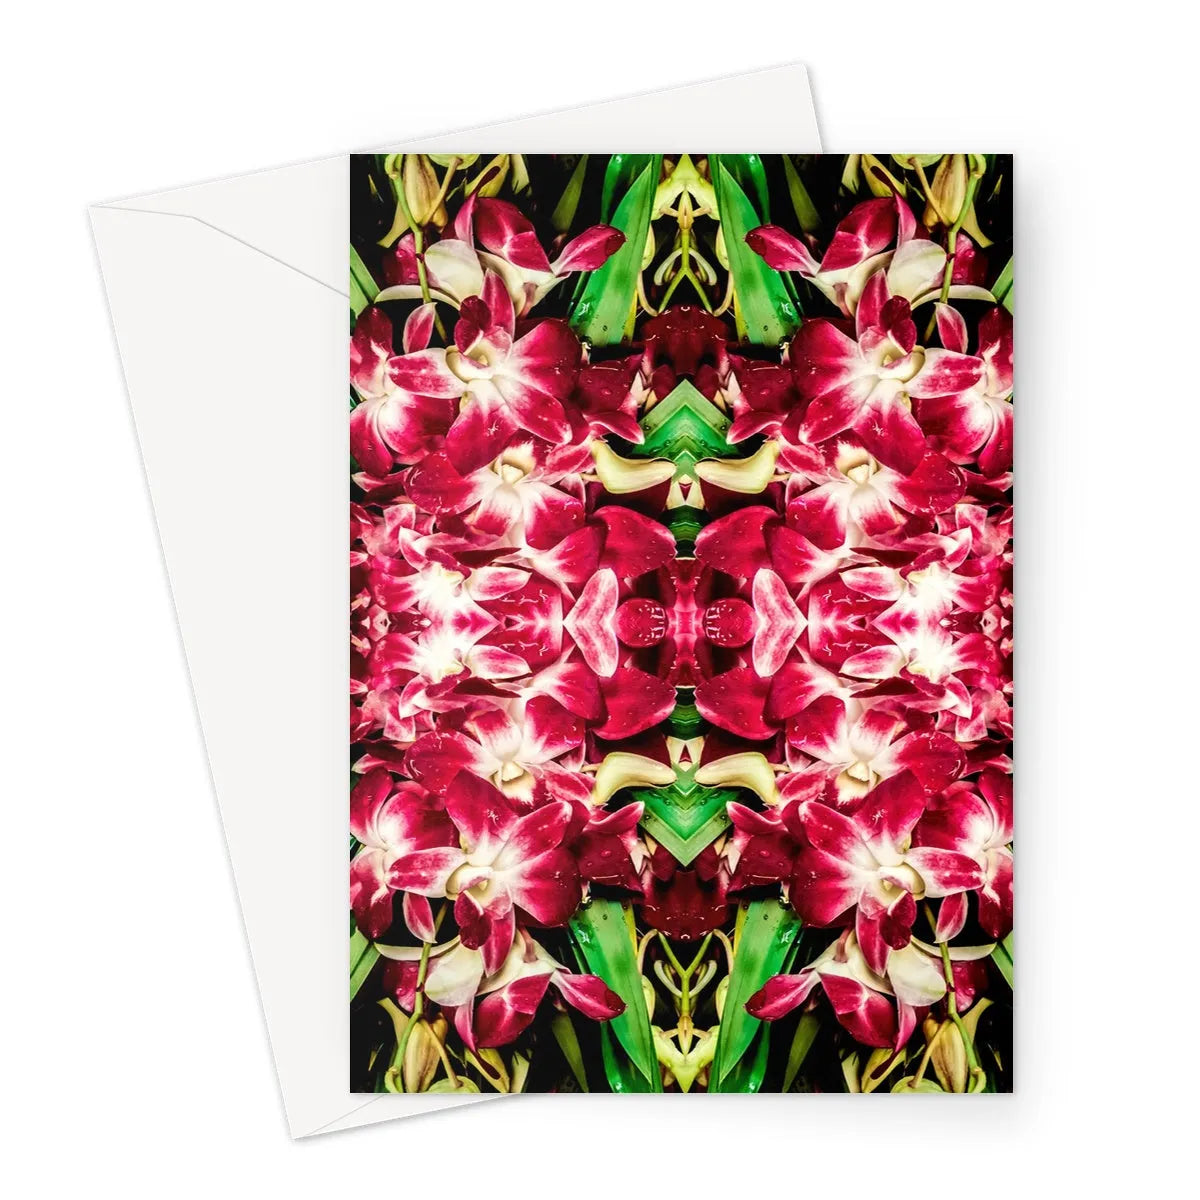 Ruby Reds Greeting Card - A5 Portrait / 1 Card - Greeting & Note Cards - Aesthetic Art